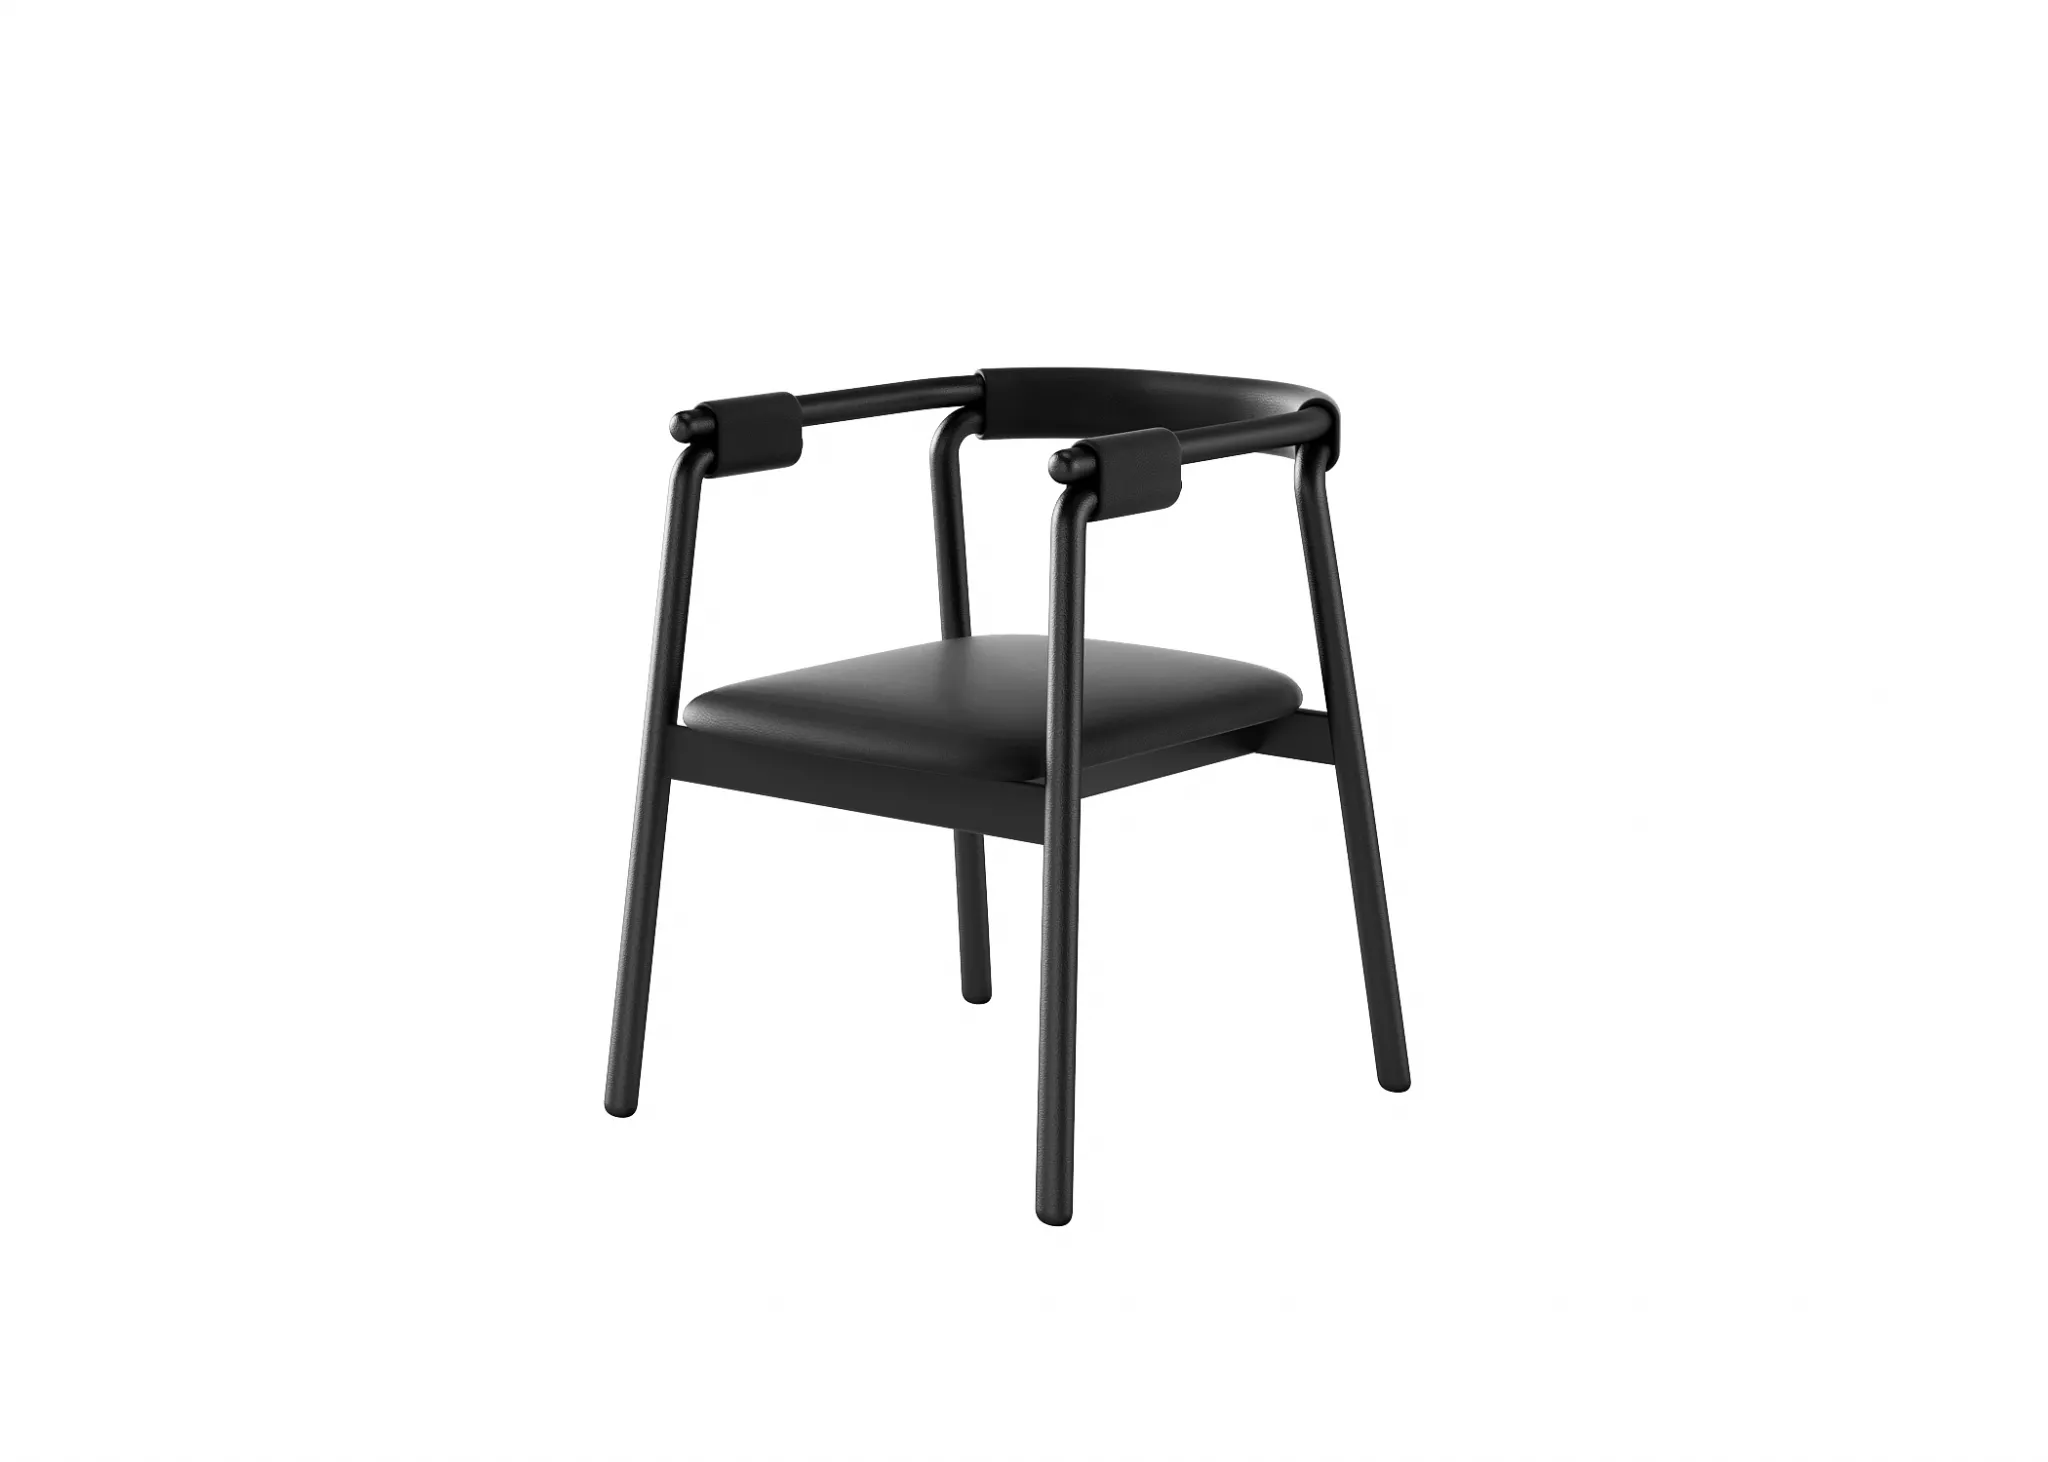 FURNITURE 3D MODELS – CHAIRS – 0396